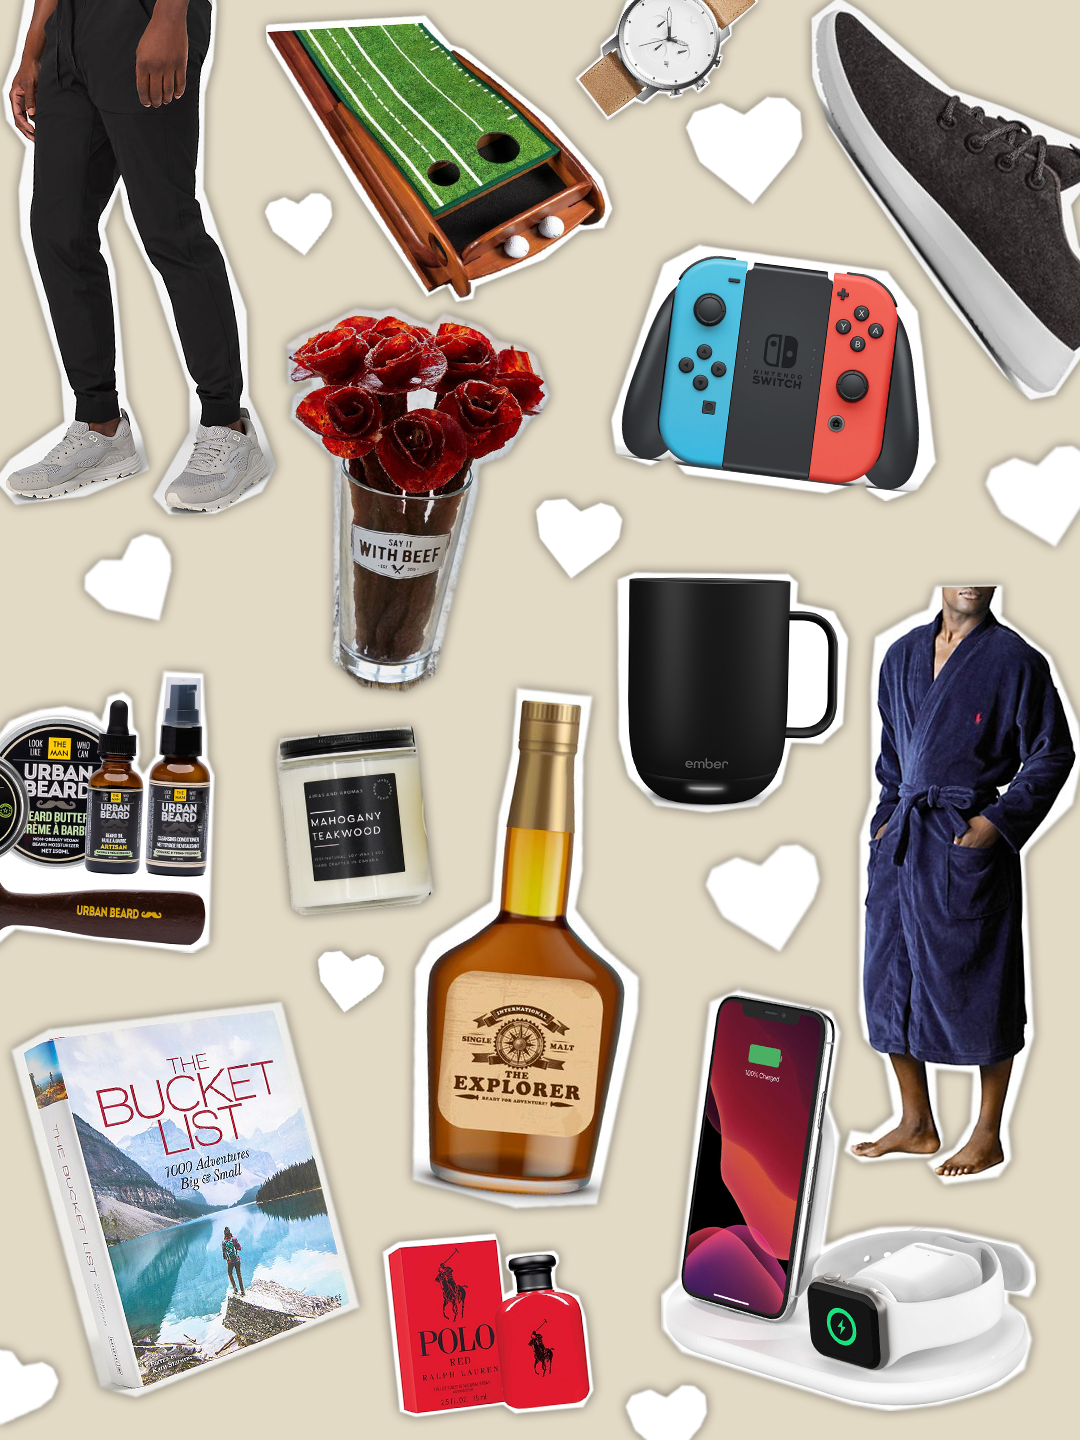 101 Awesome Small Gifts for Boyfriend (Infographic) | Small gifts for  boyfriend, Small gifts, Boyfriend gifts